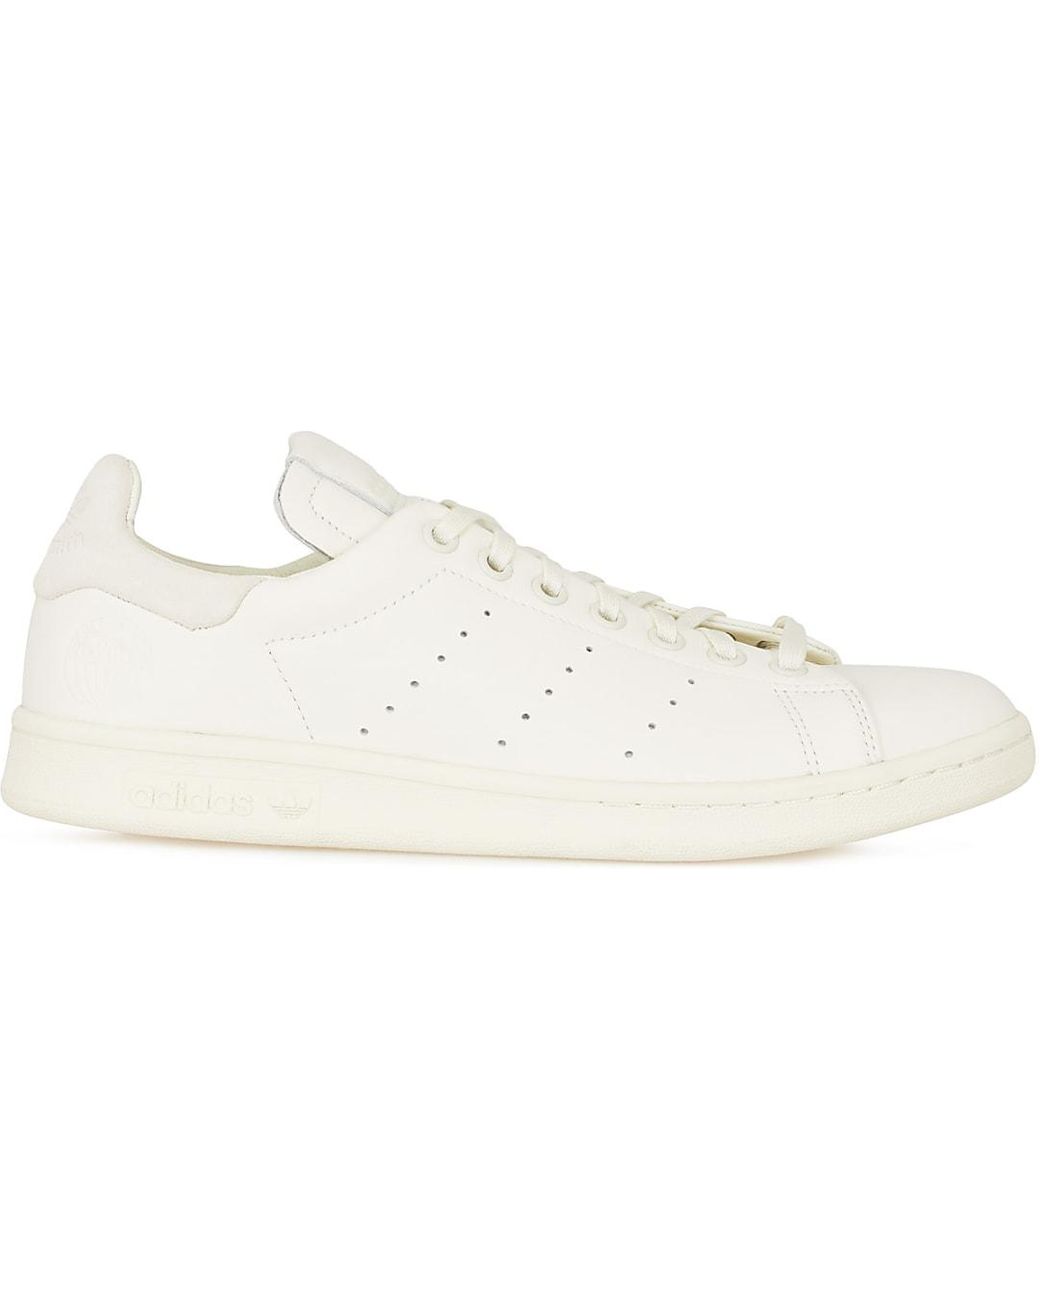 adidas Originals Leather Stan Smith Recon in White for Men - Lyst